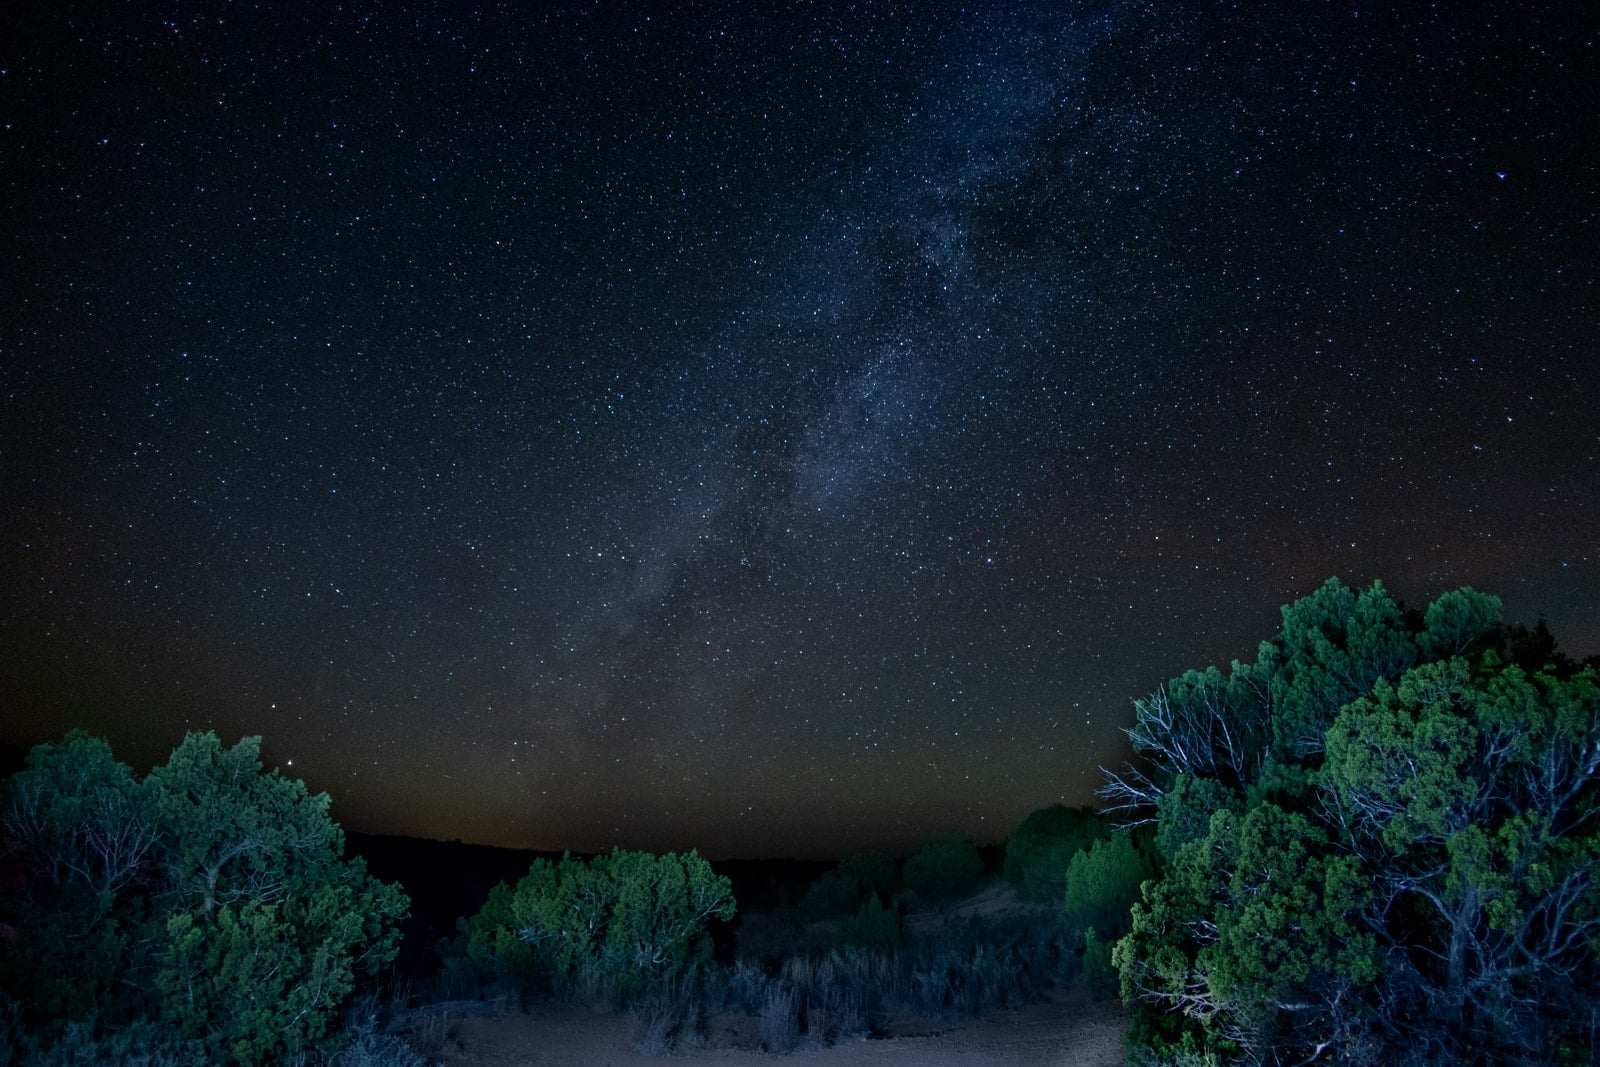 The Milky Way Galaxy seen from Copper Breaks State Park in Texas